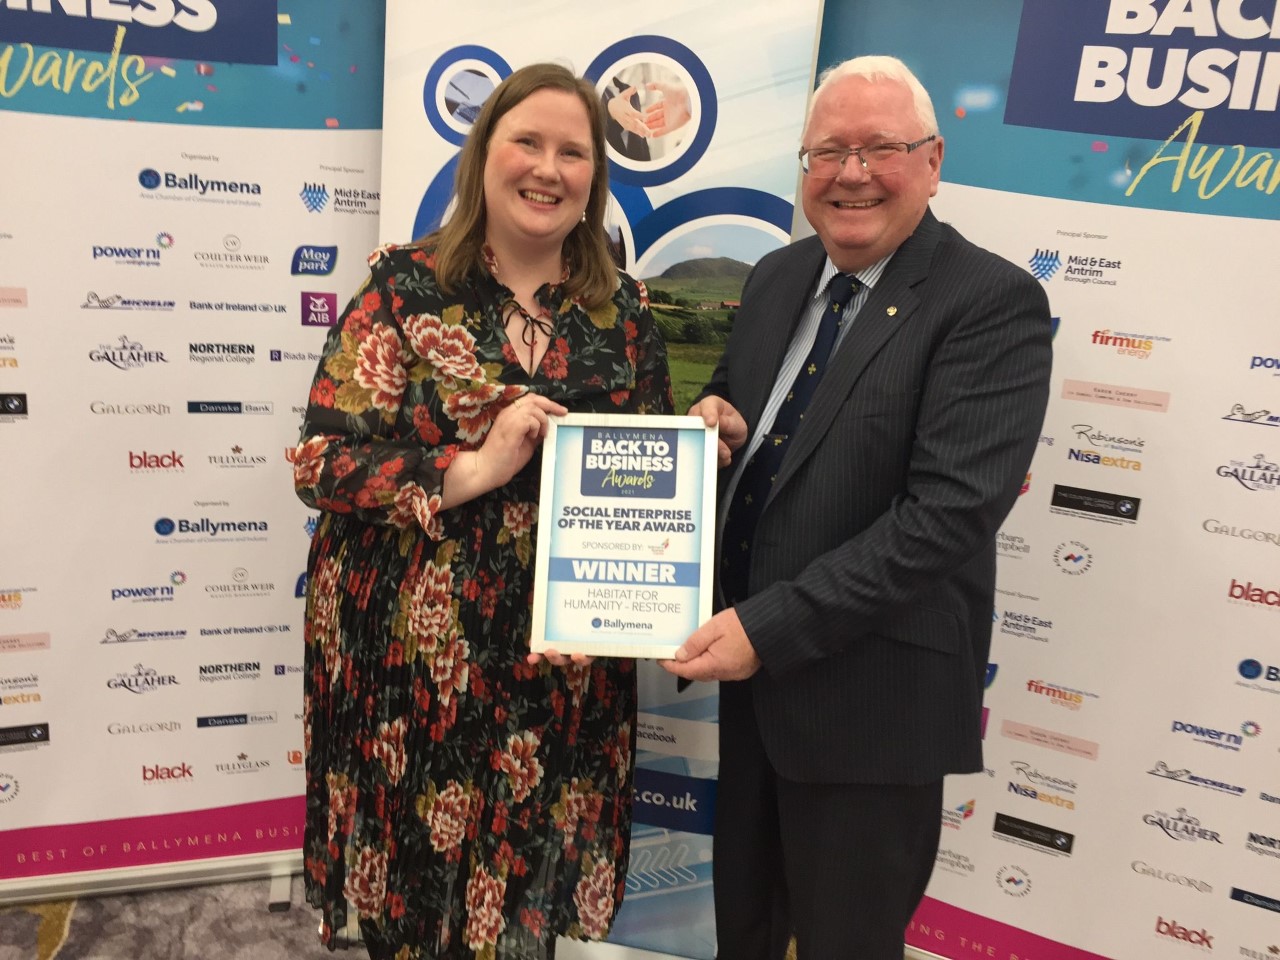 ReStore Ballymena manager Isobel Kerr receiving the store's award for Social Enterprise of the year at the Ballymena Business Awards